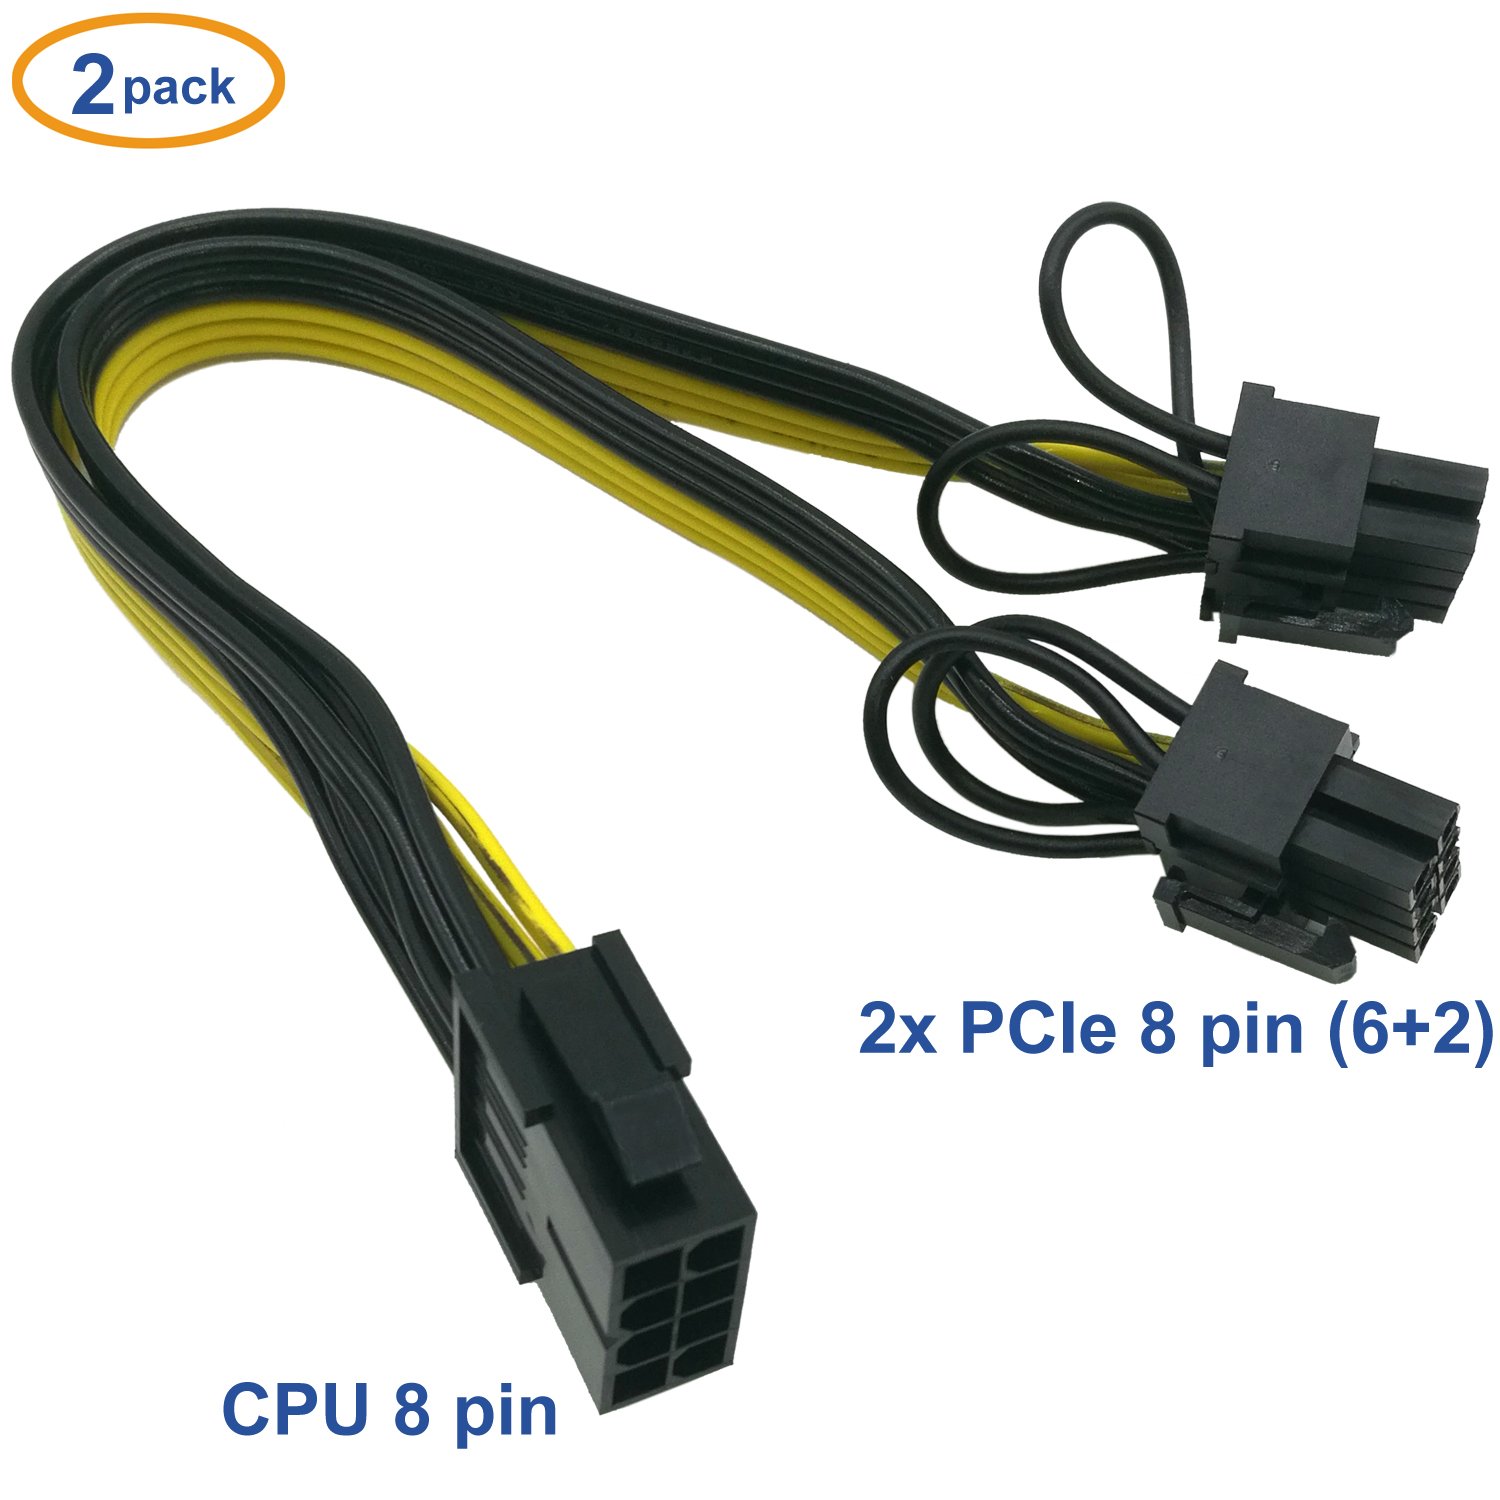 COMeap GPU VGA PCIe 8 Pin Female to Dual 2X 8 Pin Male PCI Express Power Adapter Y-Splitter Extension Cable 9.4-inch 2-Pack 24cm 6+2 